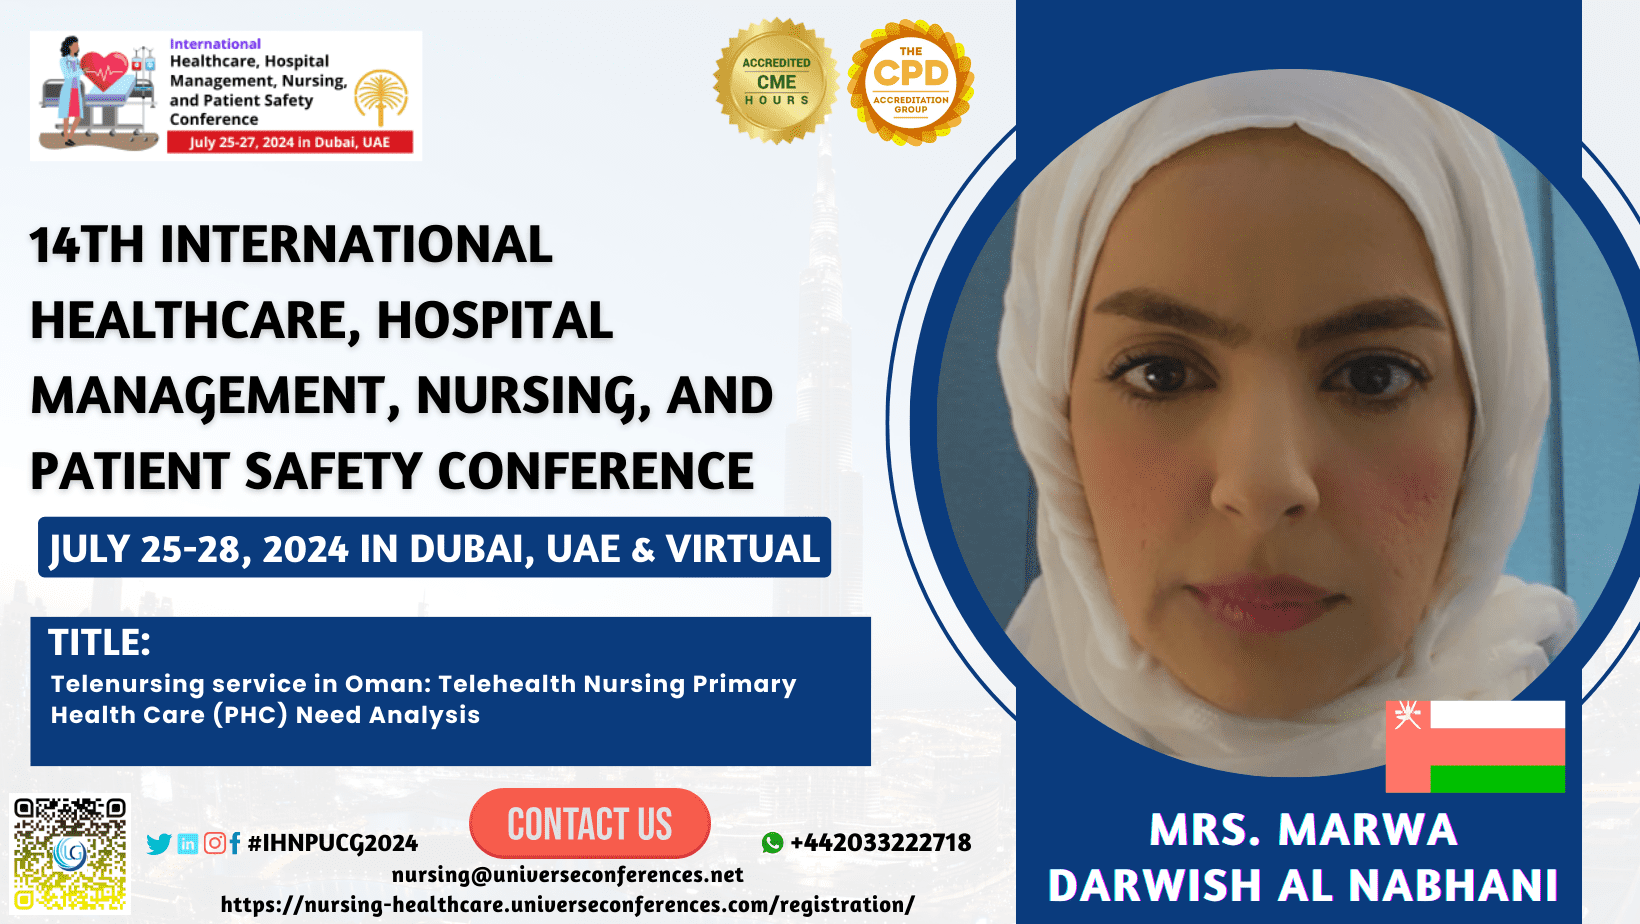 Mrs. Marwa Darwish Al Nabhani_14th International Healthcare, Hospital Management, Nursing, and Patient Safety Conference (1) (1)